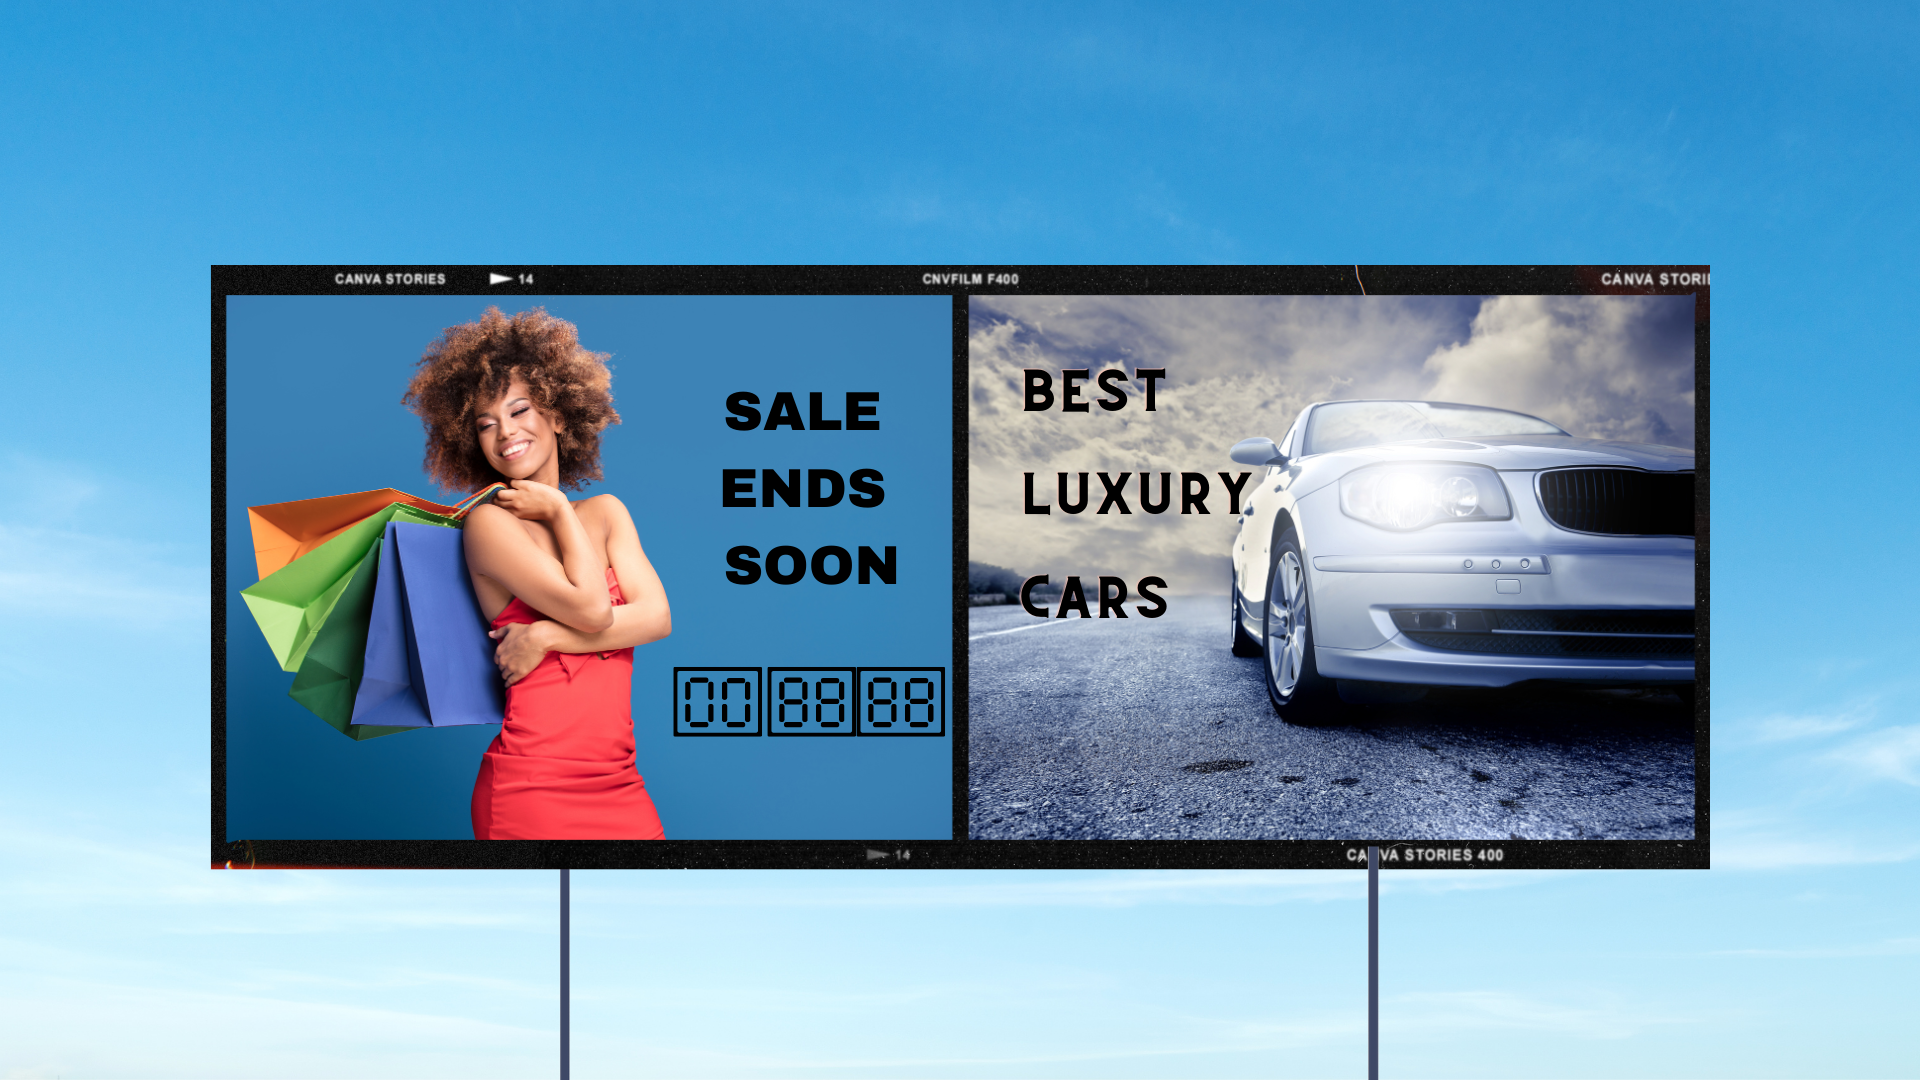 A tall outdoor digital signage partially obscures the clear blue sky. The digital signage is made of two screens: the screen on the left shows a smiling woman in a red dress carrying colorful shopping bags. Besides the figure, is the text ‘Sale Ends Soon’ and a digital countdown clock showing 00:88:88. The screen on the right shows the image of the front of a steel-colored car on a road, and the text ‘Best Luxury Cars’.